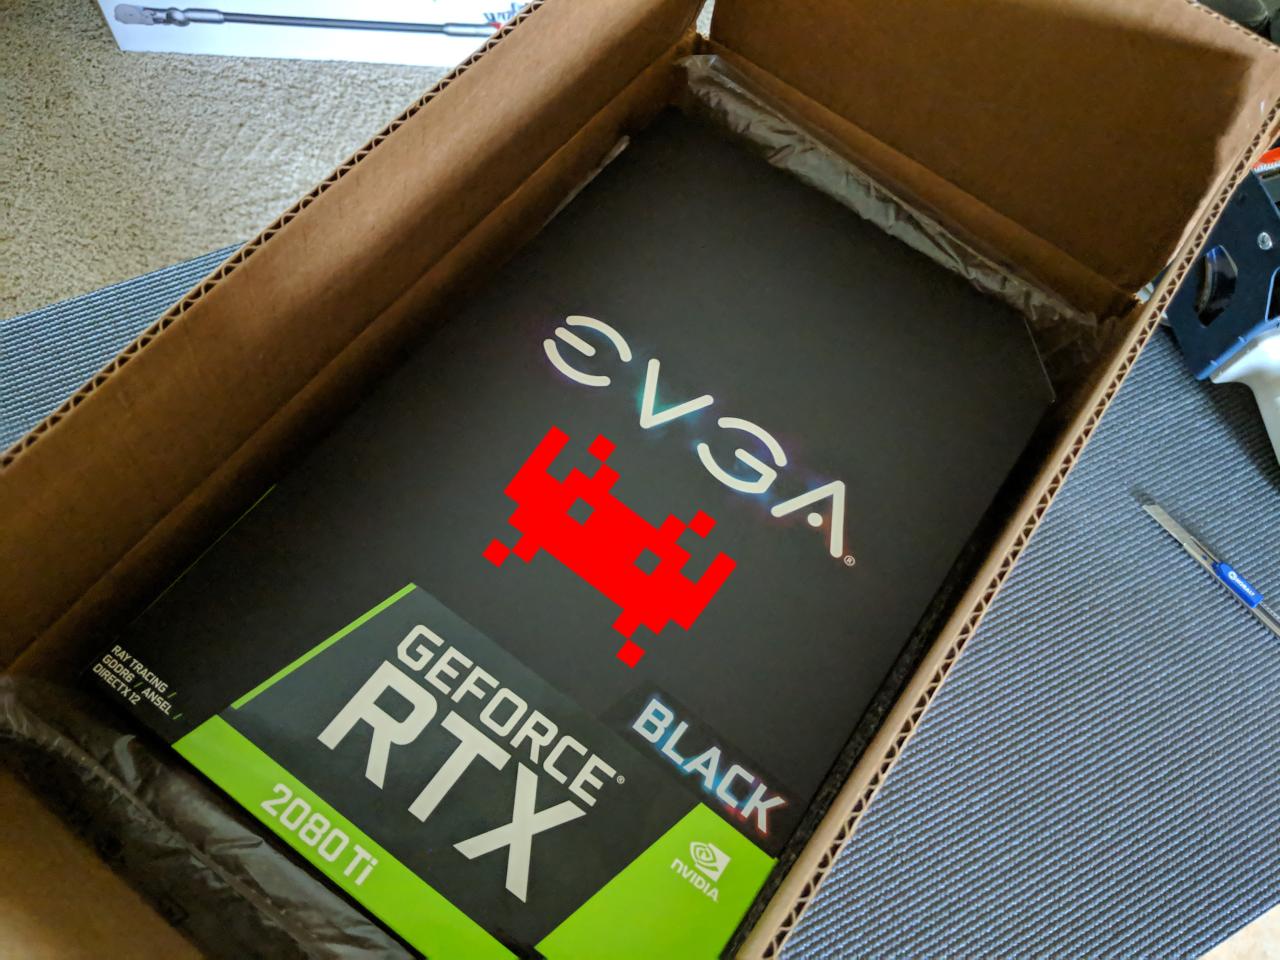 H]ardOCP.com on Twitter: "@NVIDIAGeForce RTX Space Invaders testing is moving forward with qualified to find out why this @TEAMEVGA RTX 2080 Ti produces Space Invaders artifacting. https://t.co/xLfiJqwmDB https://t.co/5bdMDOZzMk" / Twitter